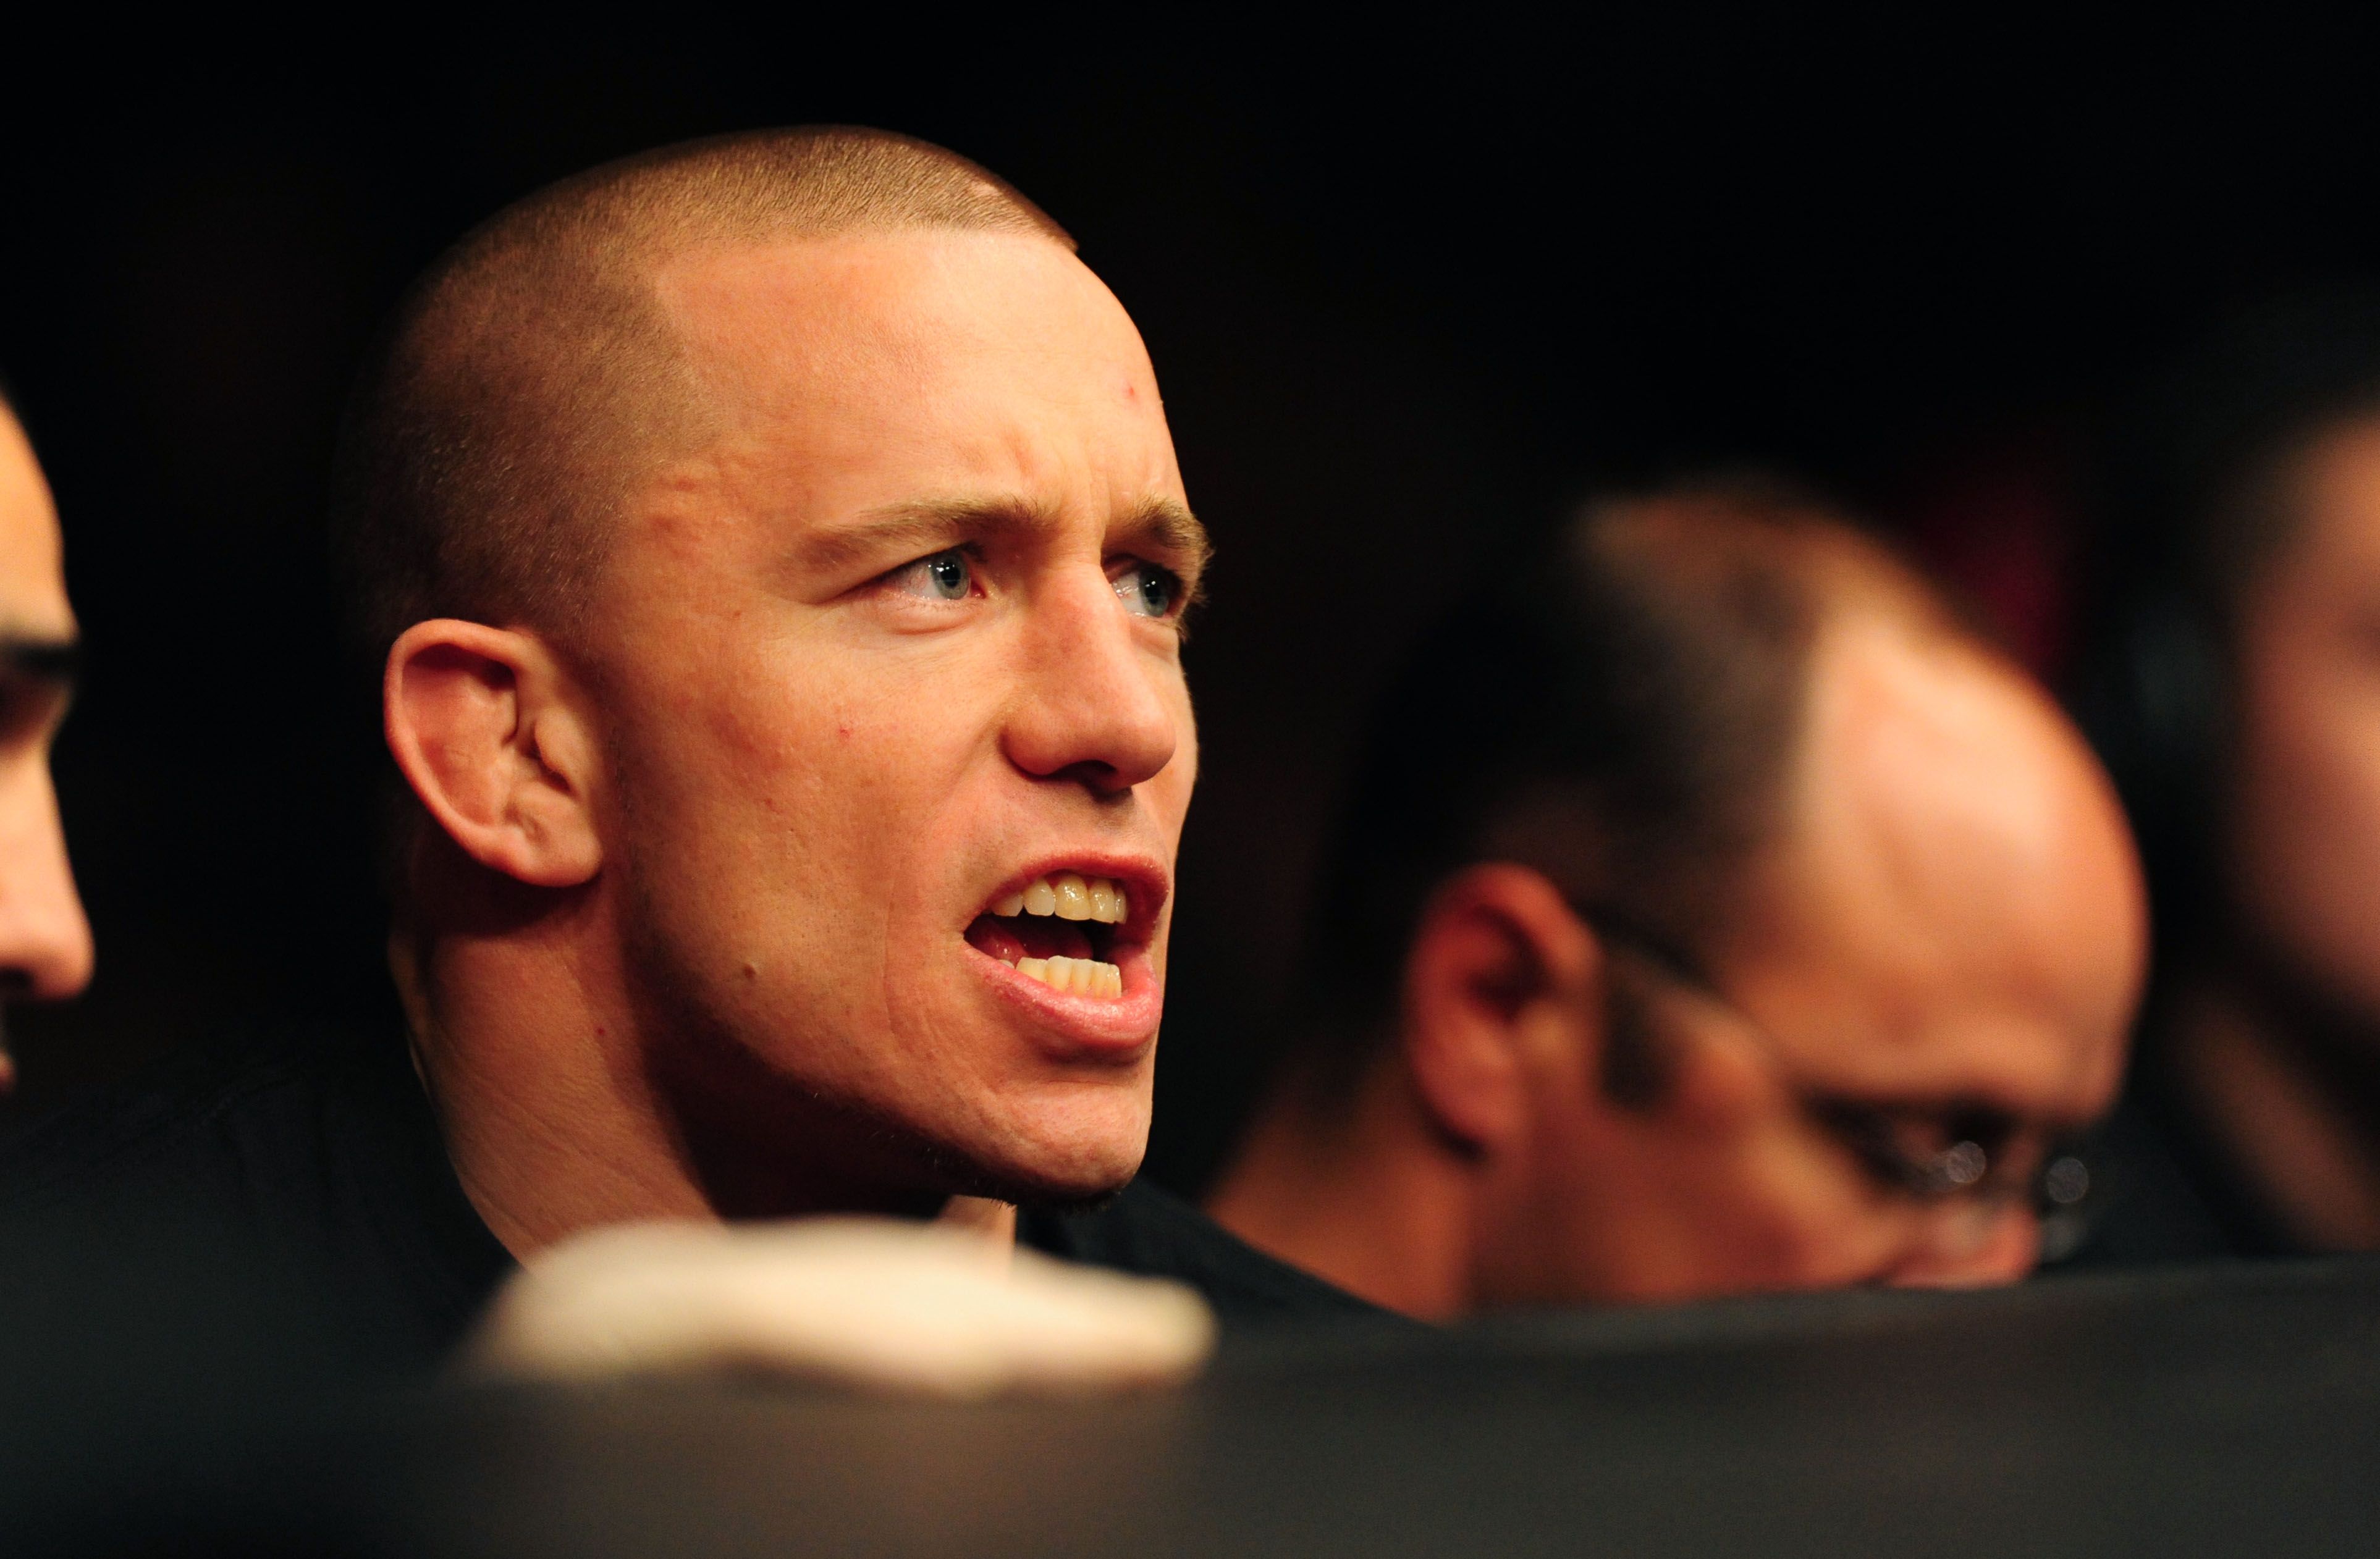 GSP at ringside at a UFC show